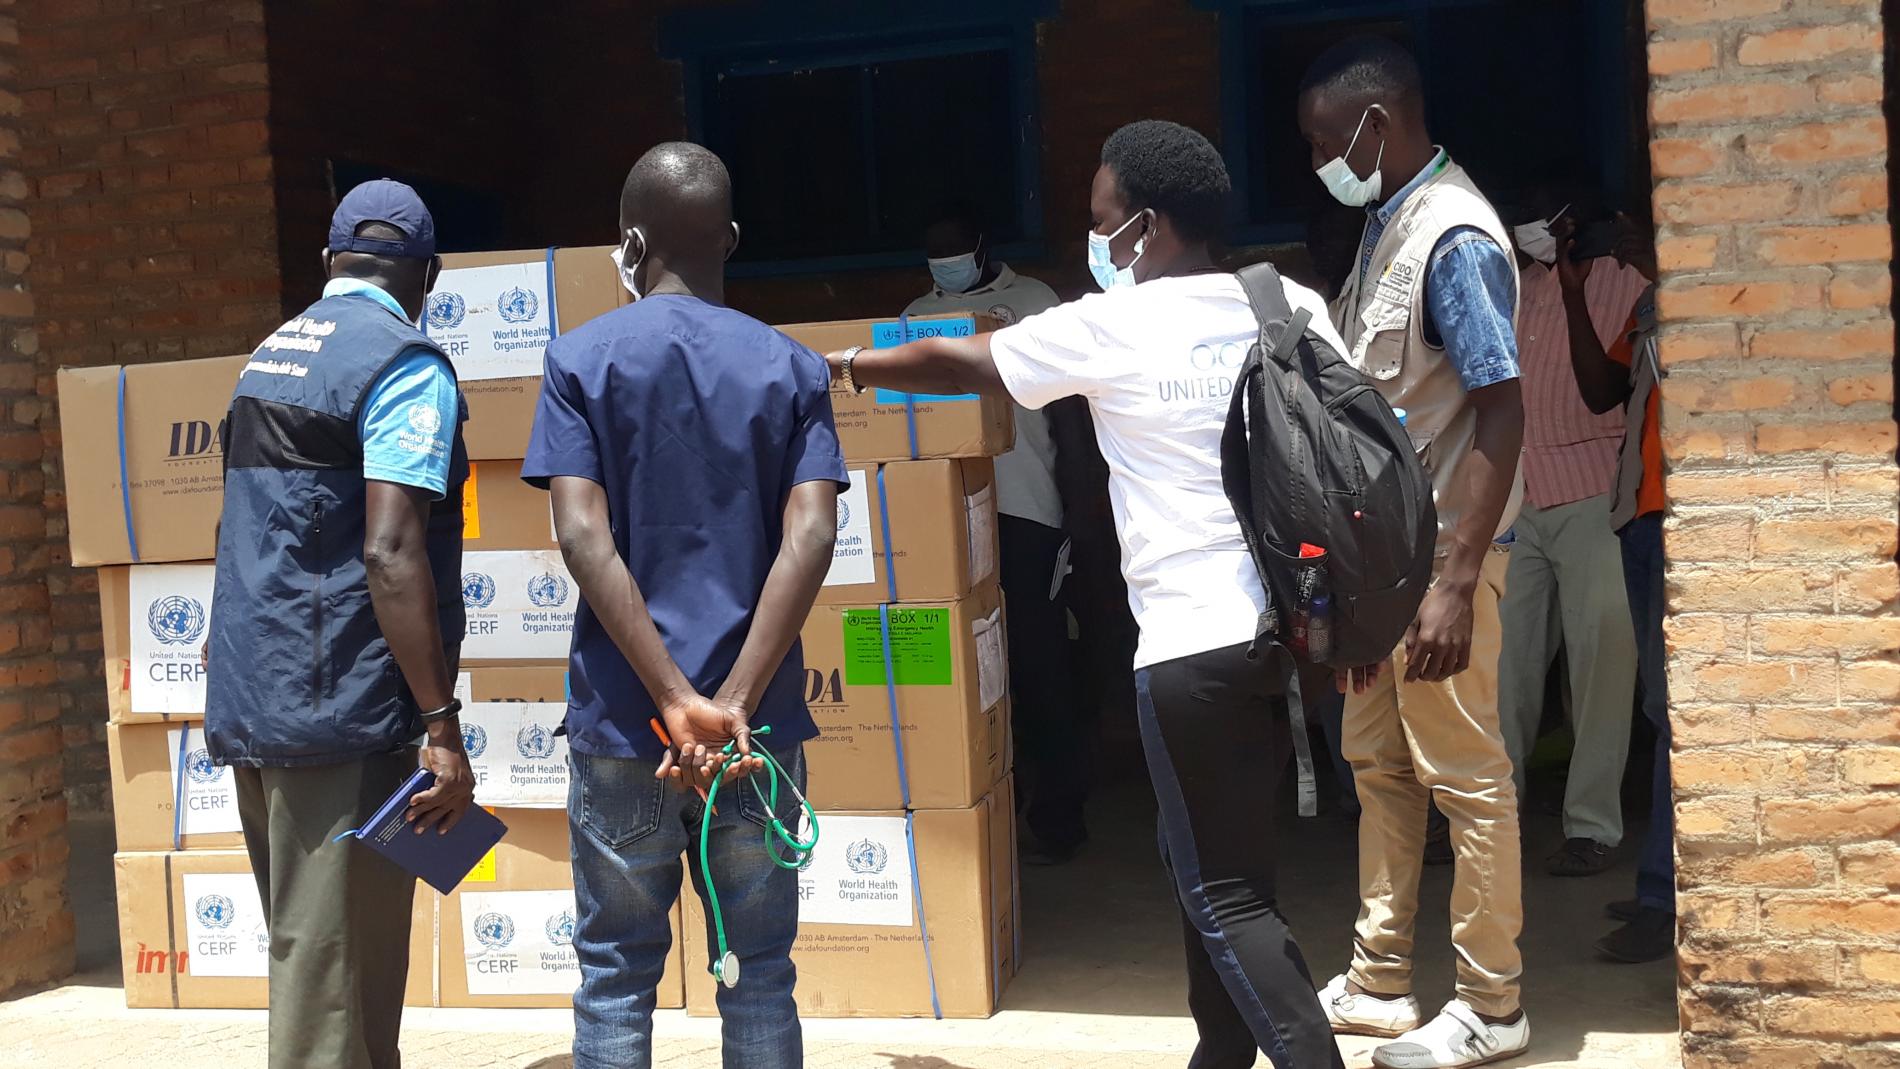 WHO delivered lifesaving medicines and medical supplies to assist the internally displaced people, returnees and host communities in Lainya, Wonduruba and Katigiri counties of Central Equatoria State